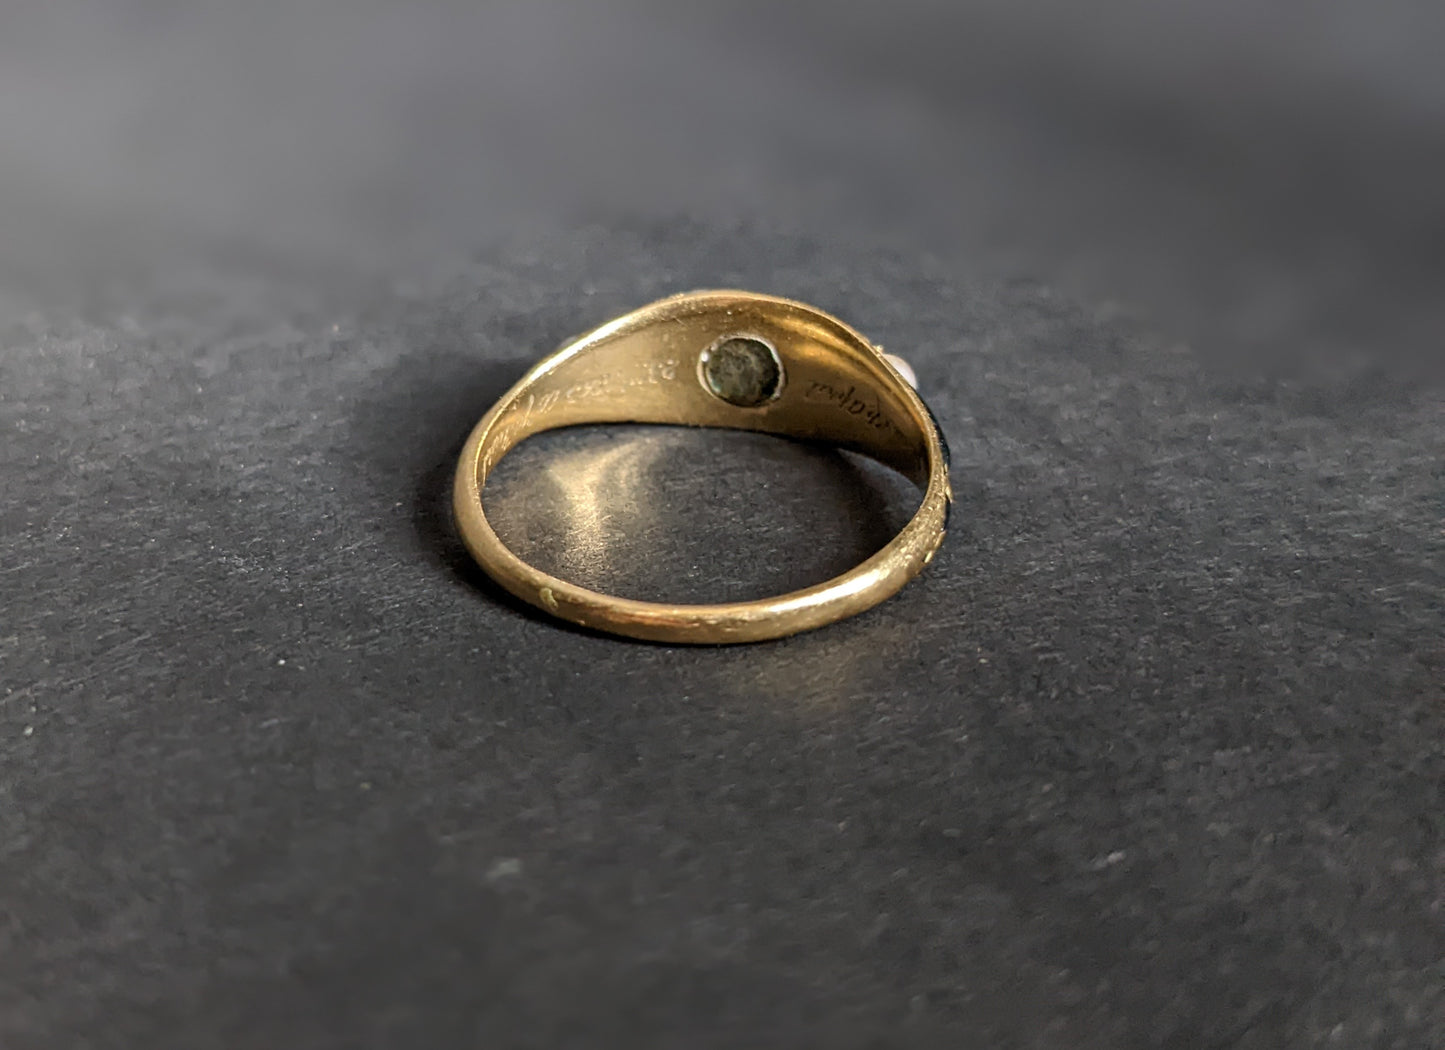 English mourning ring, with black enamel and seed pearl